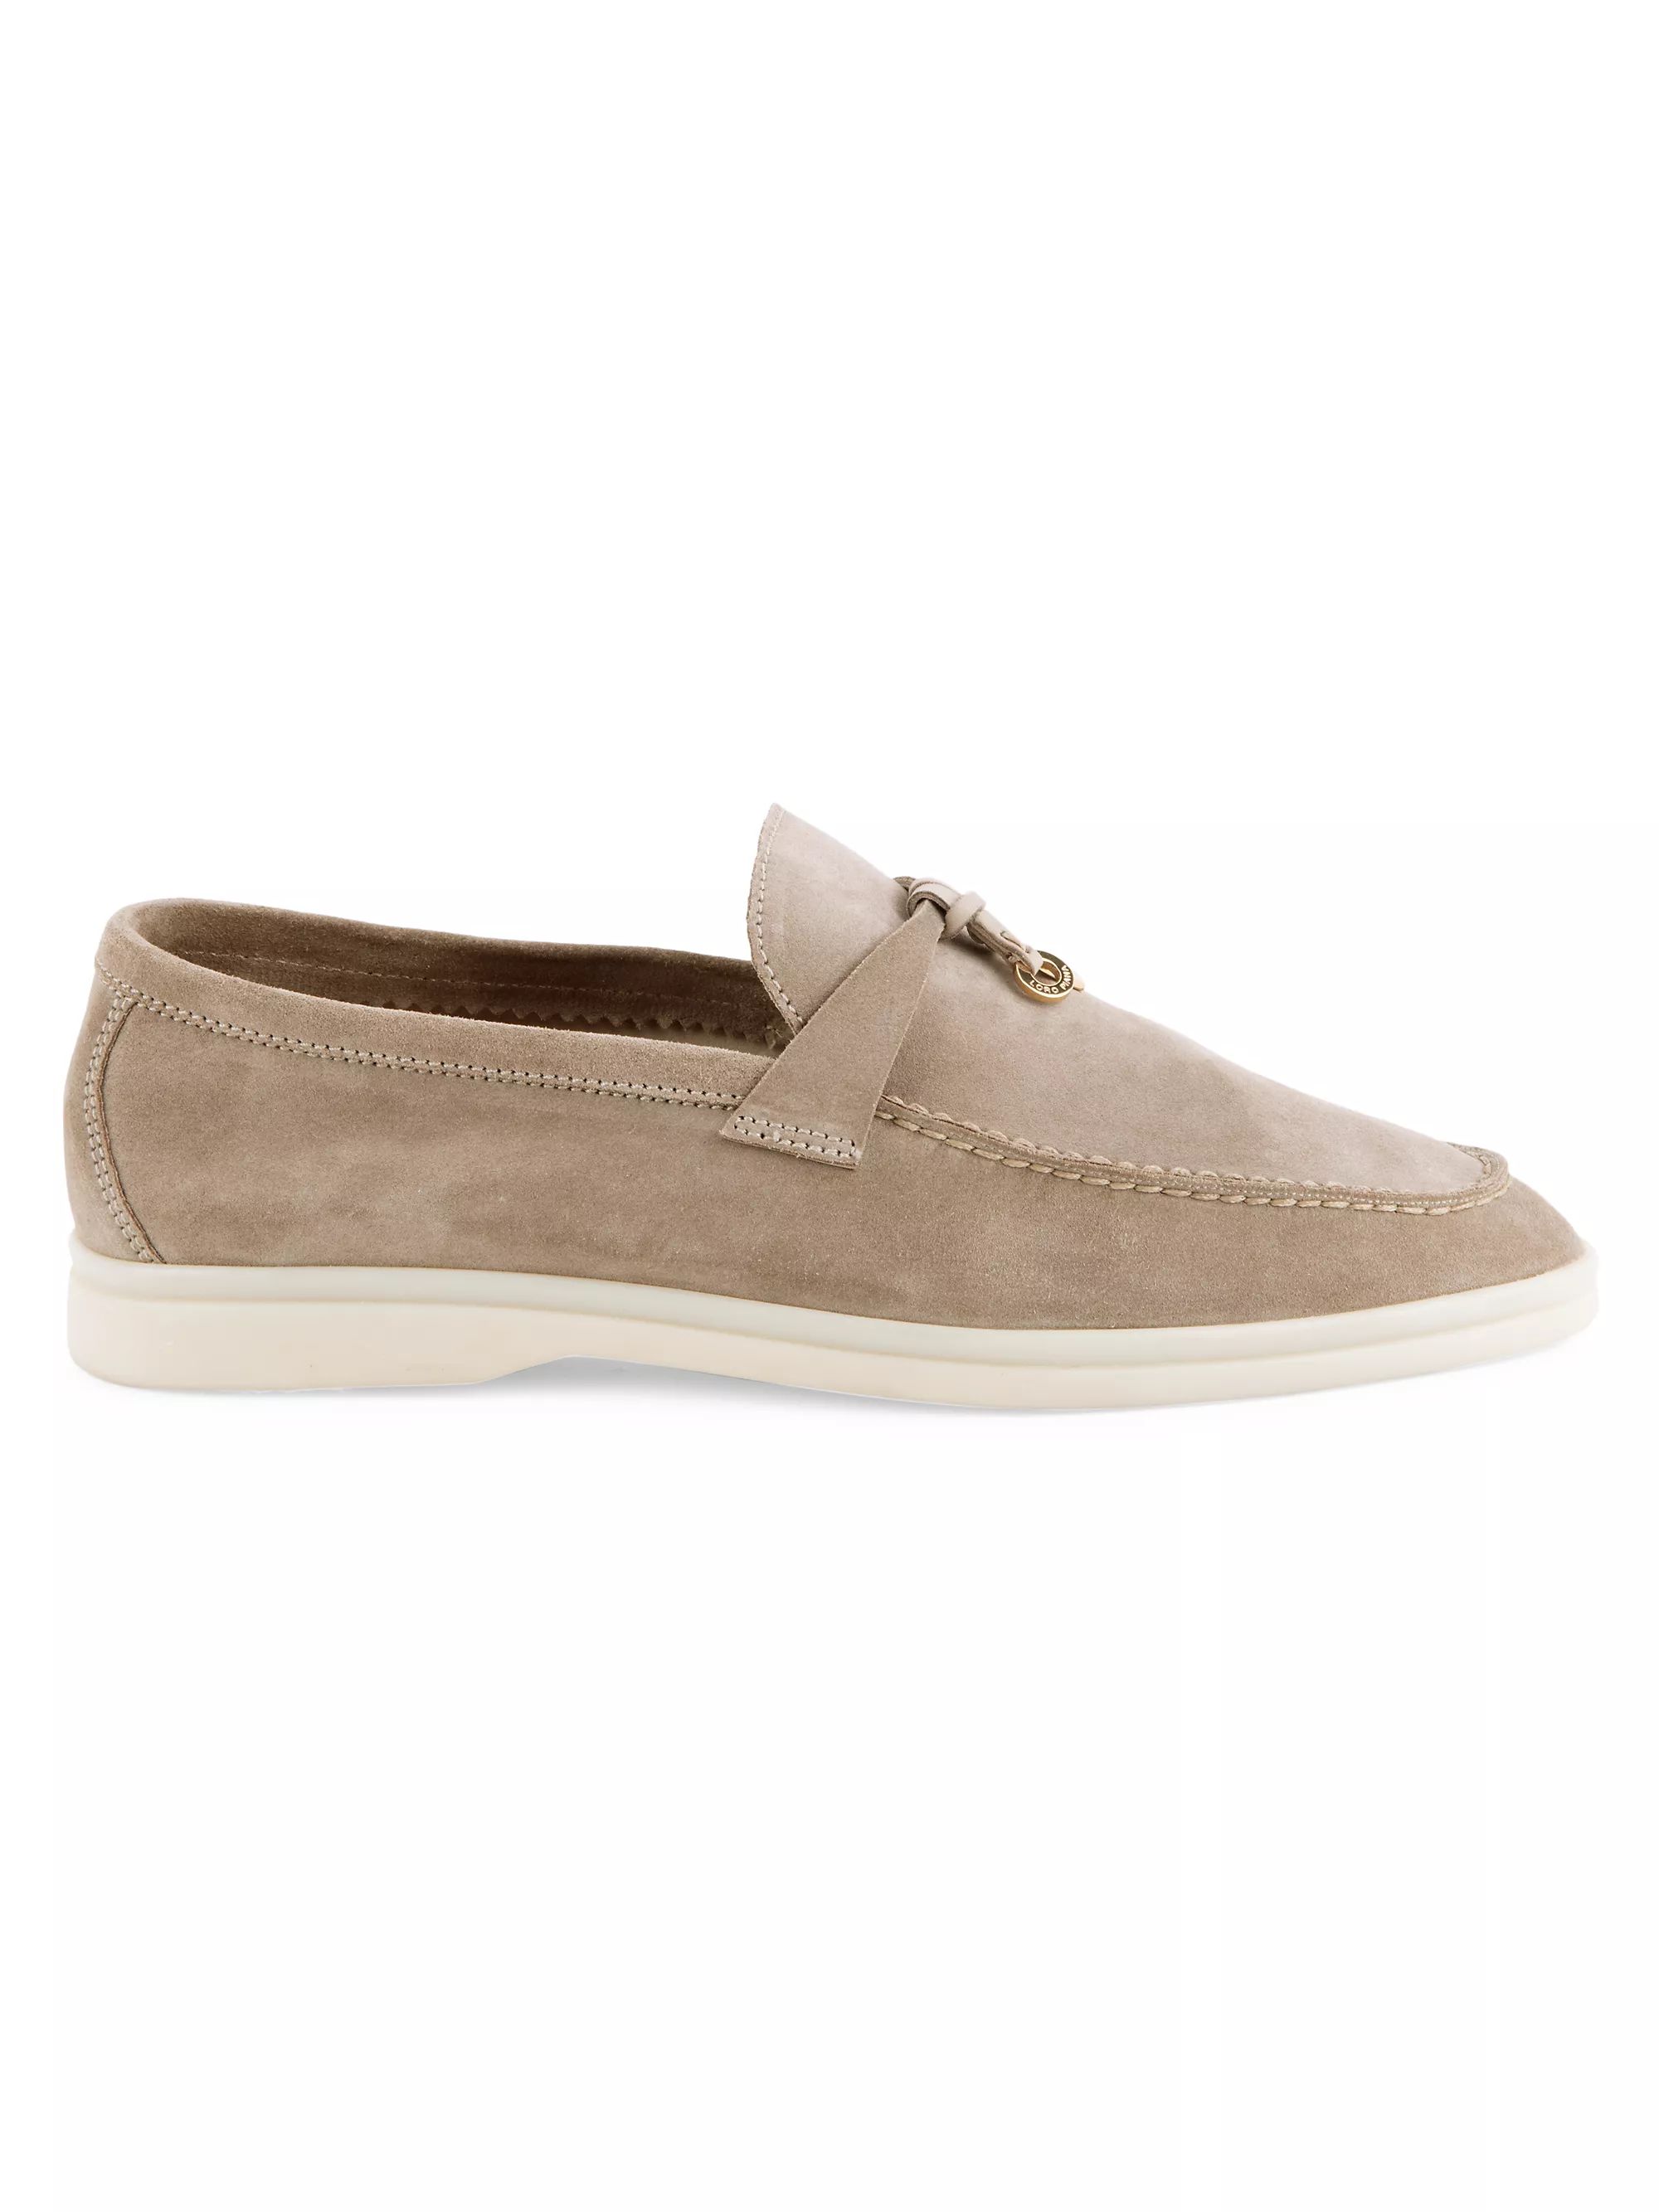 Summer Charms Walk Suede Loafers | Saks Fifth Avenue